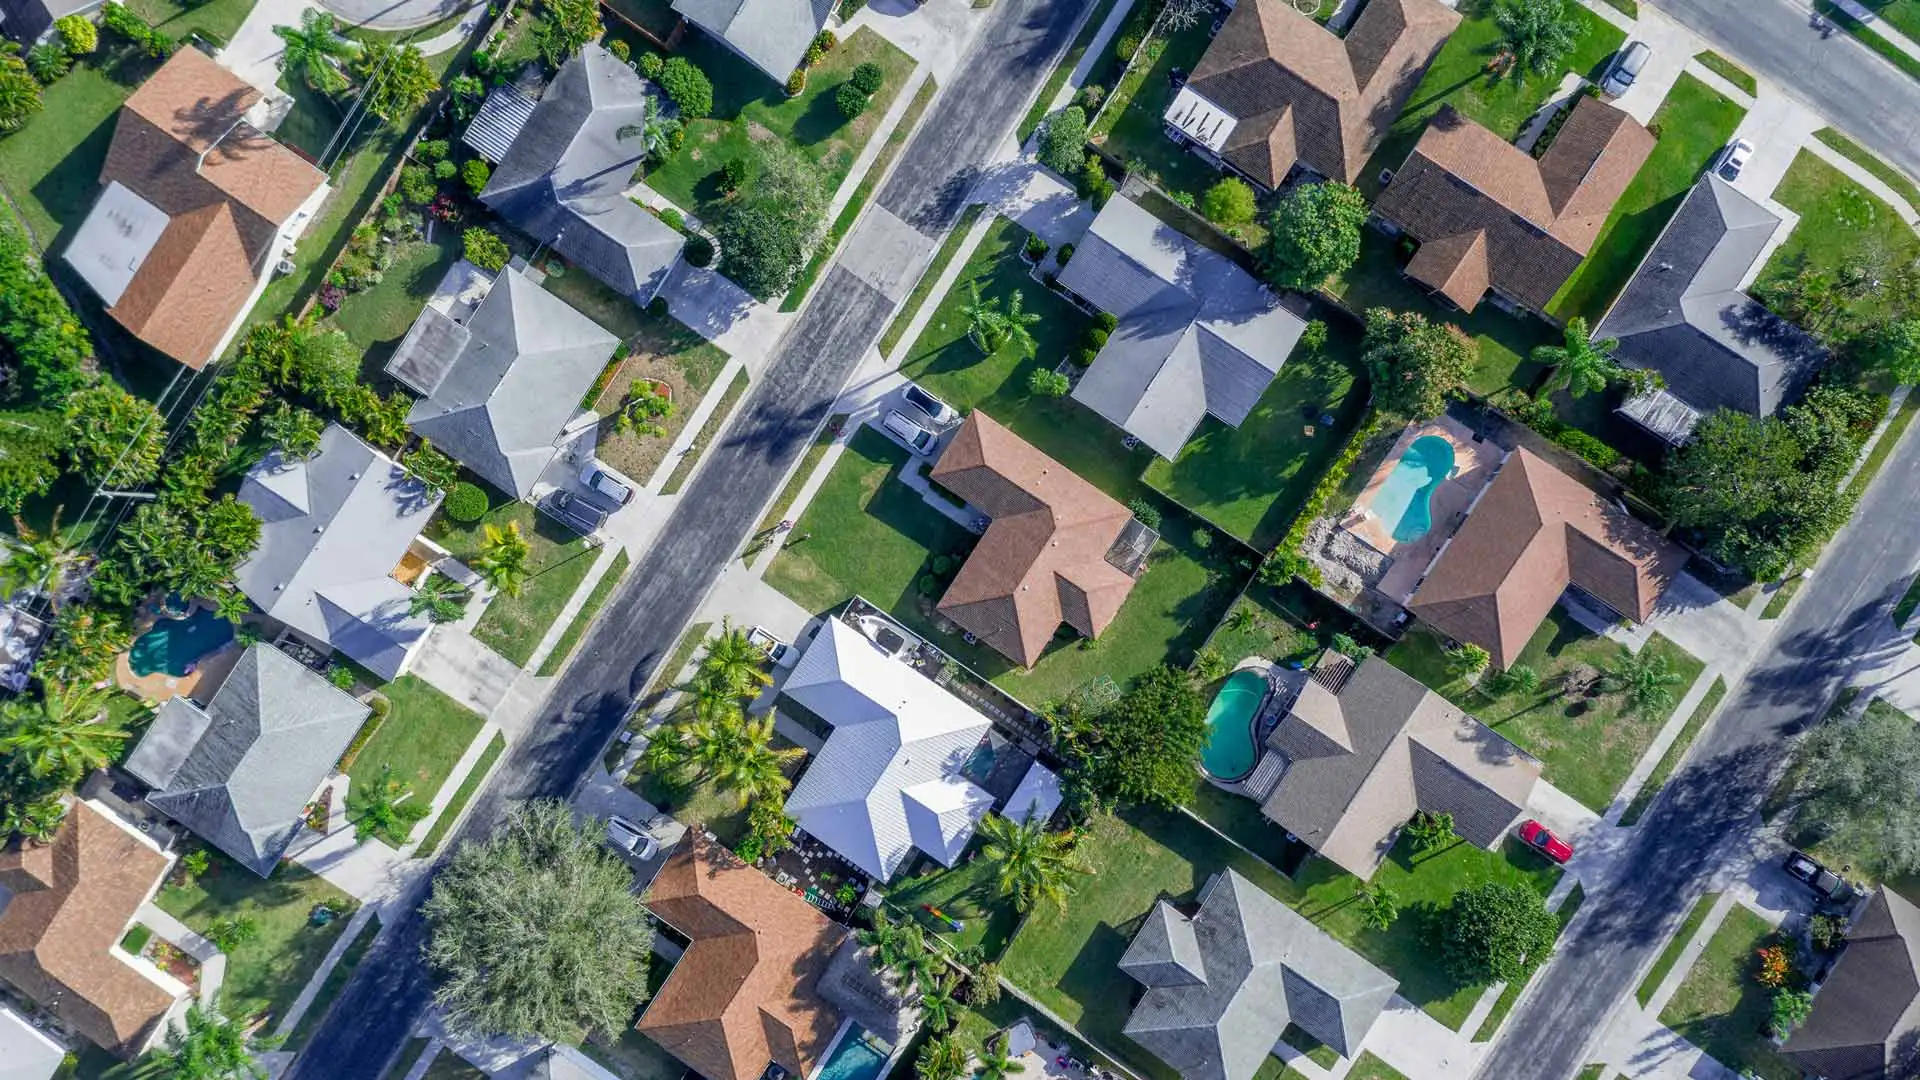 An aerial view of a tropical neighborhood in Gibsonton, FL.